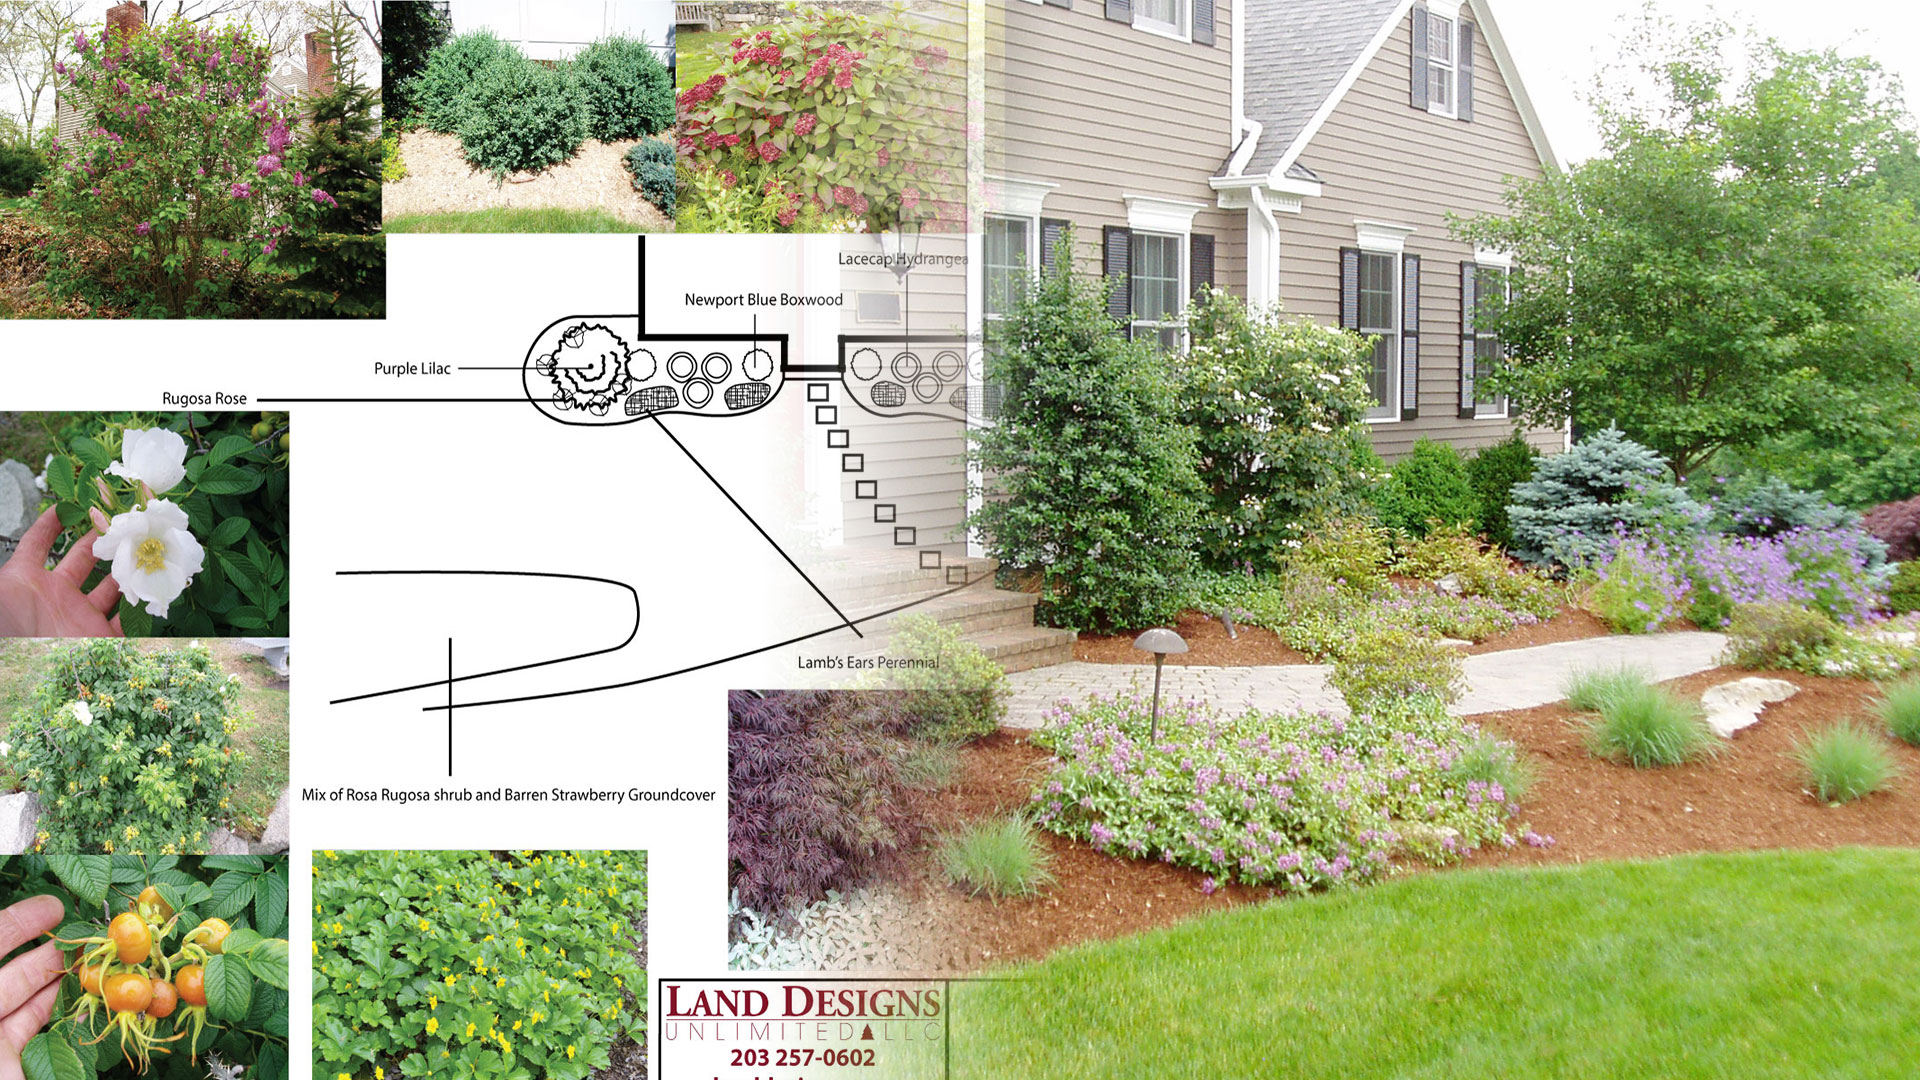 How I Got My Groove – The Stages of a Landscape Design Career